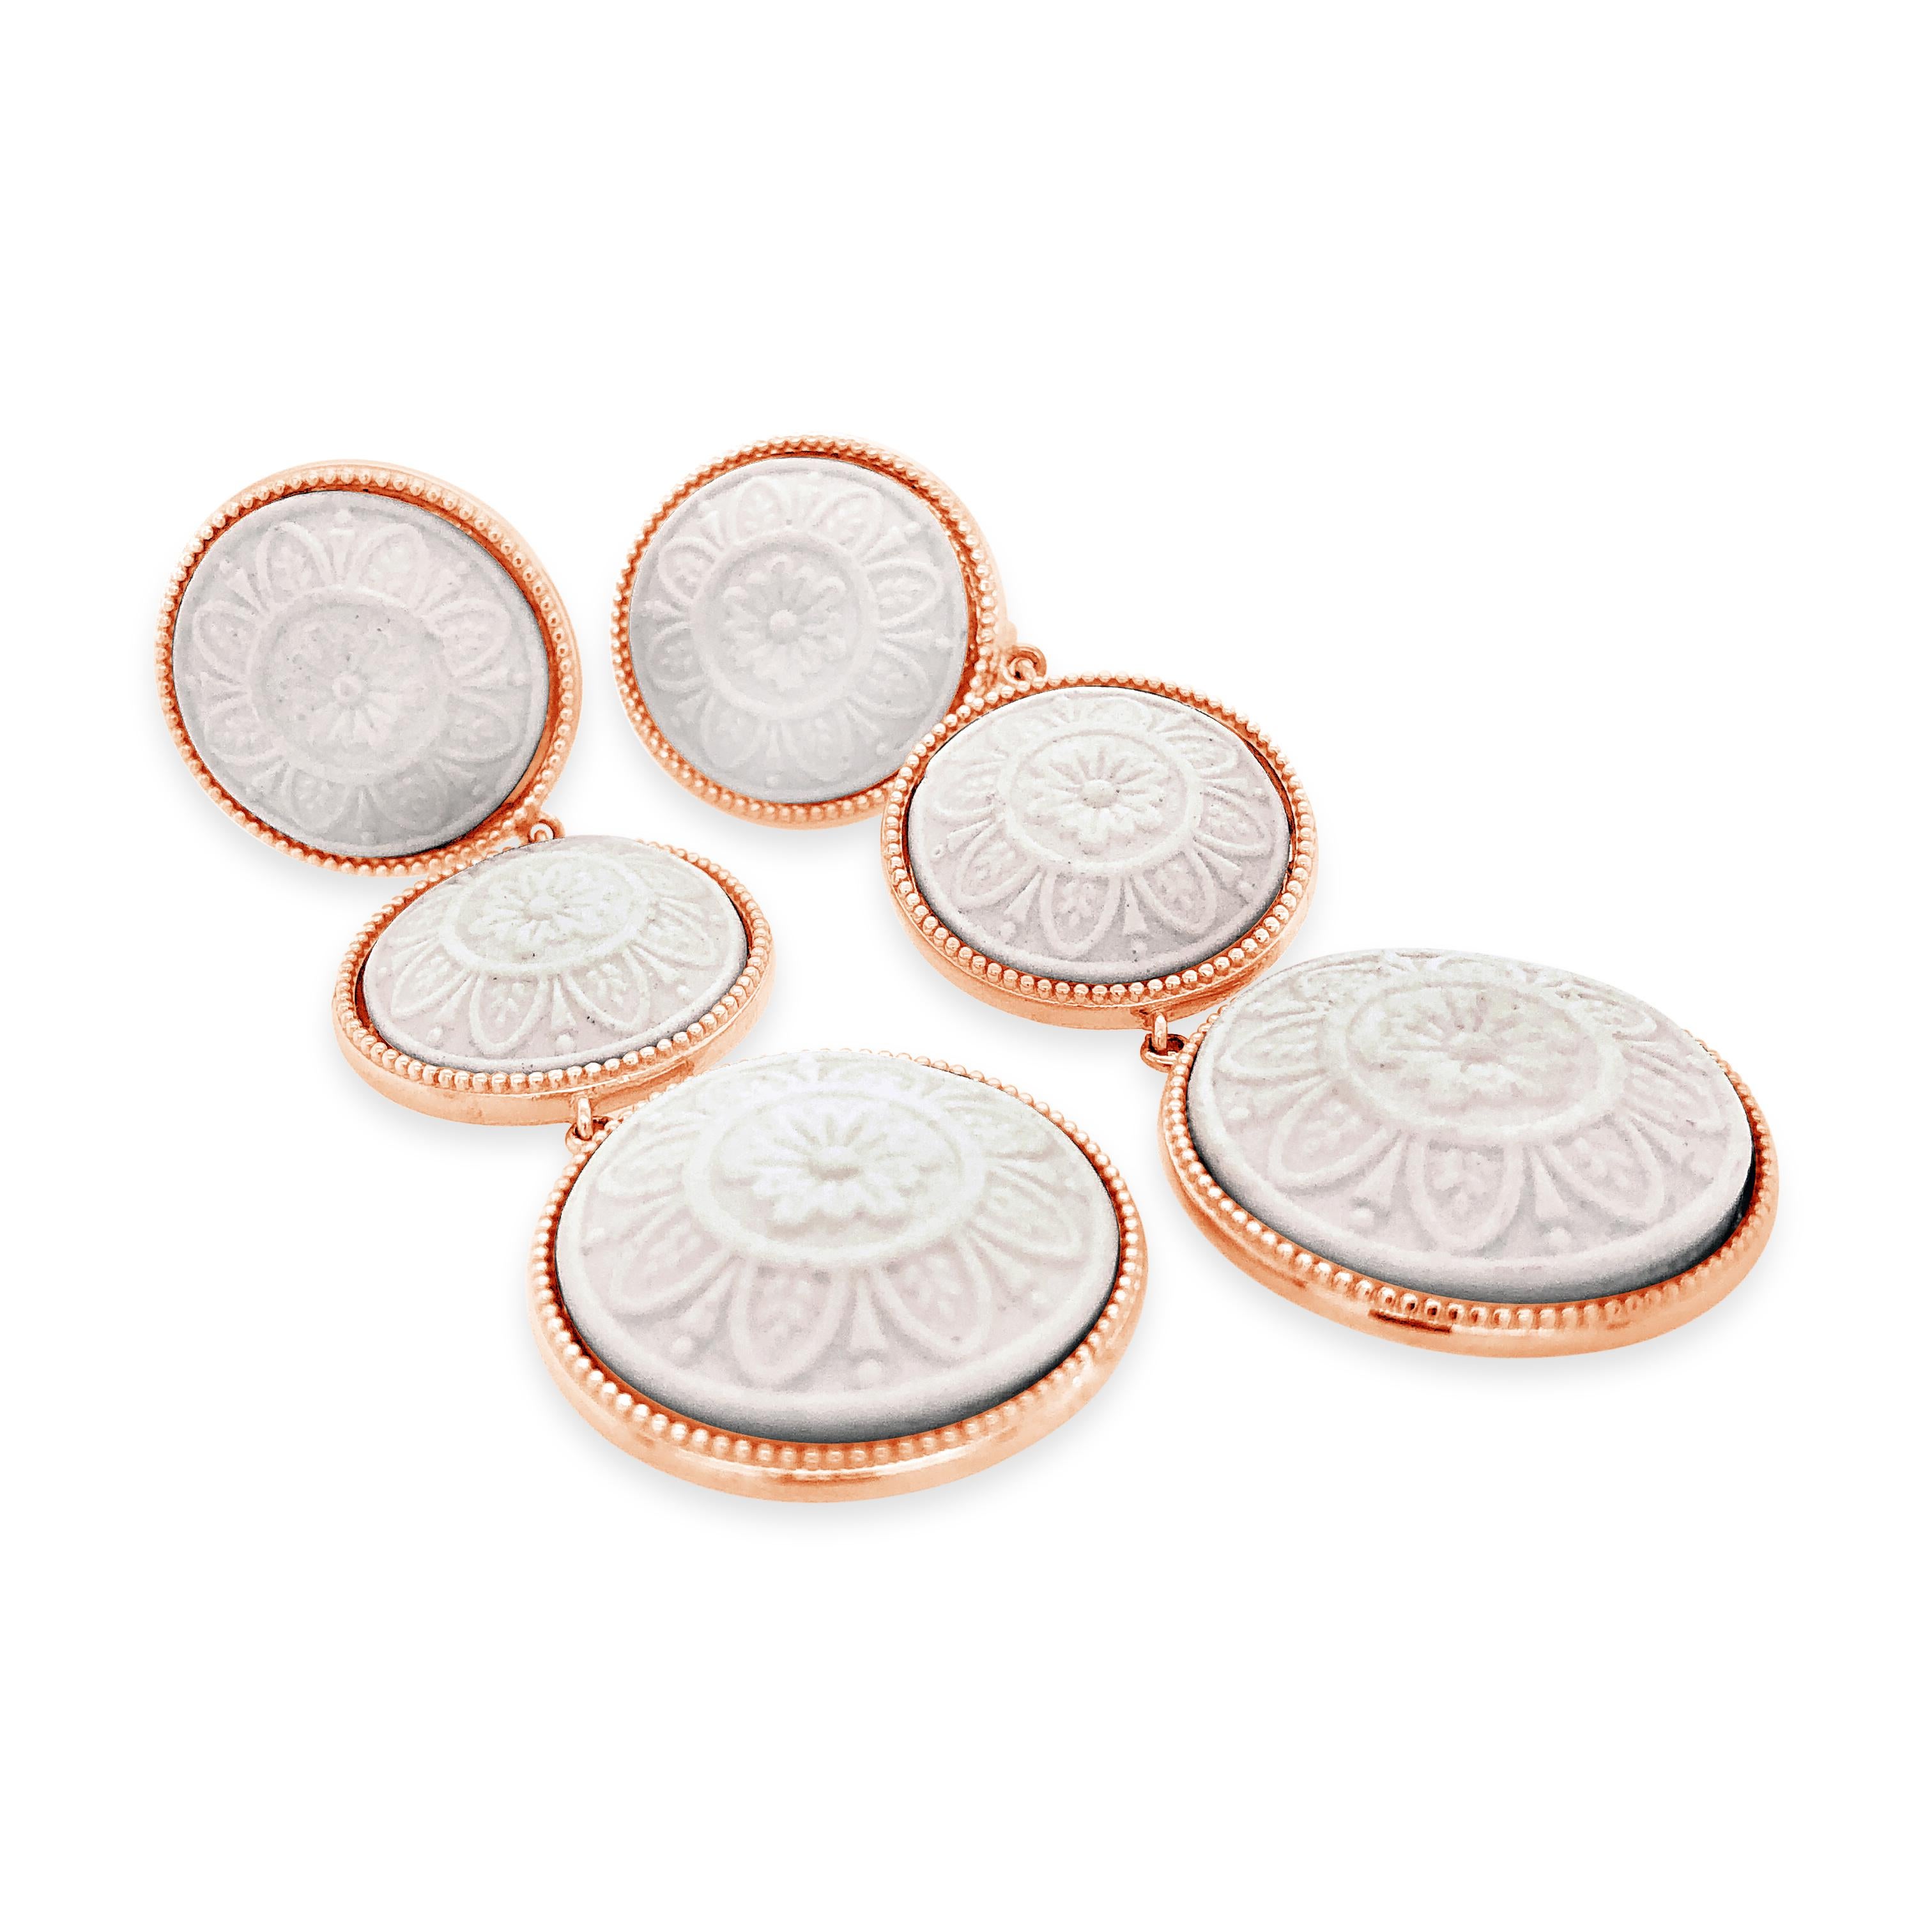 Beautifully hand crafted porcelain cameo earrings mounted in 18k rose gold vermeil. In times past, cameos were mainly made of shells, hardstones, coral and volcanic rock, instead today the cameos which bears our family’s signature are made of fine